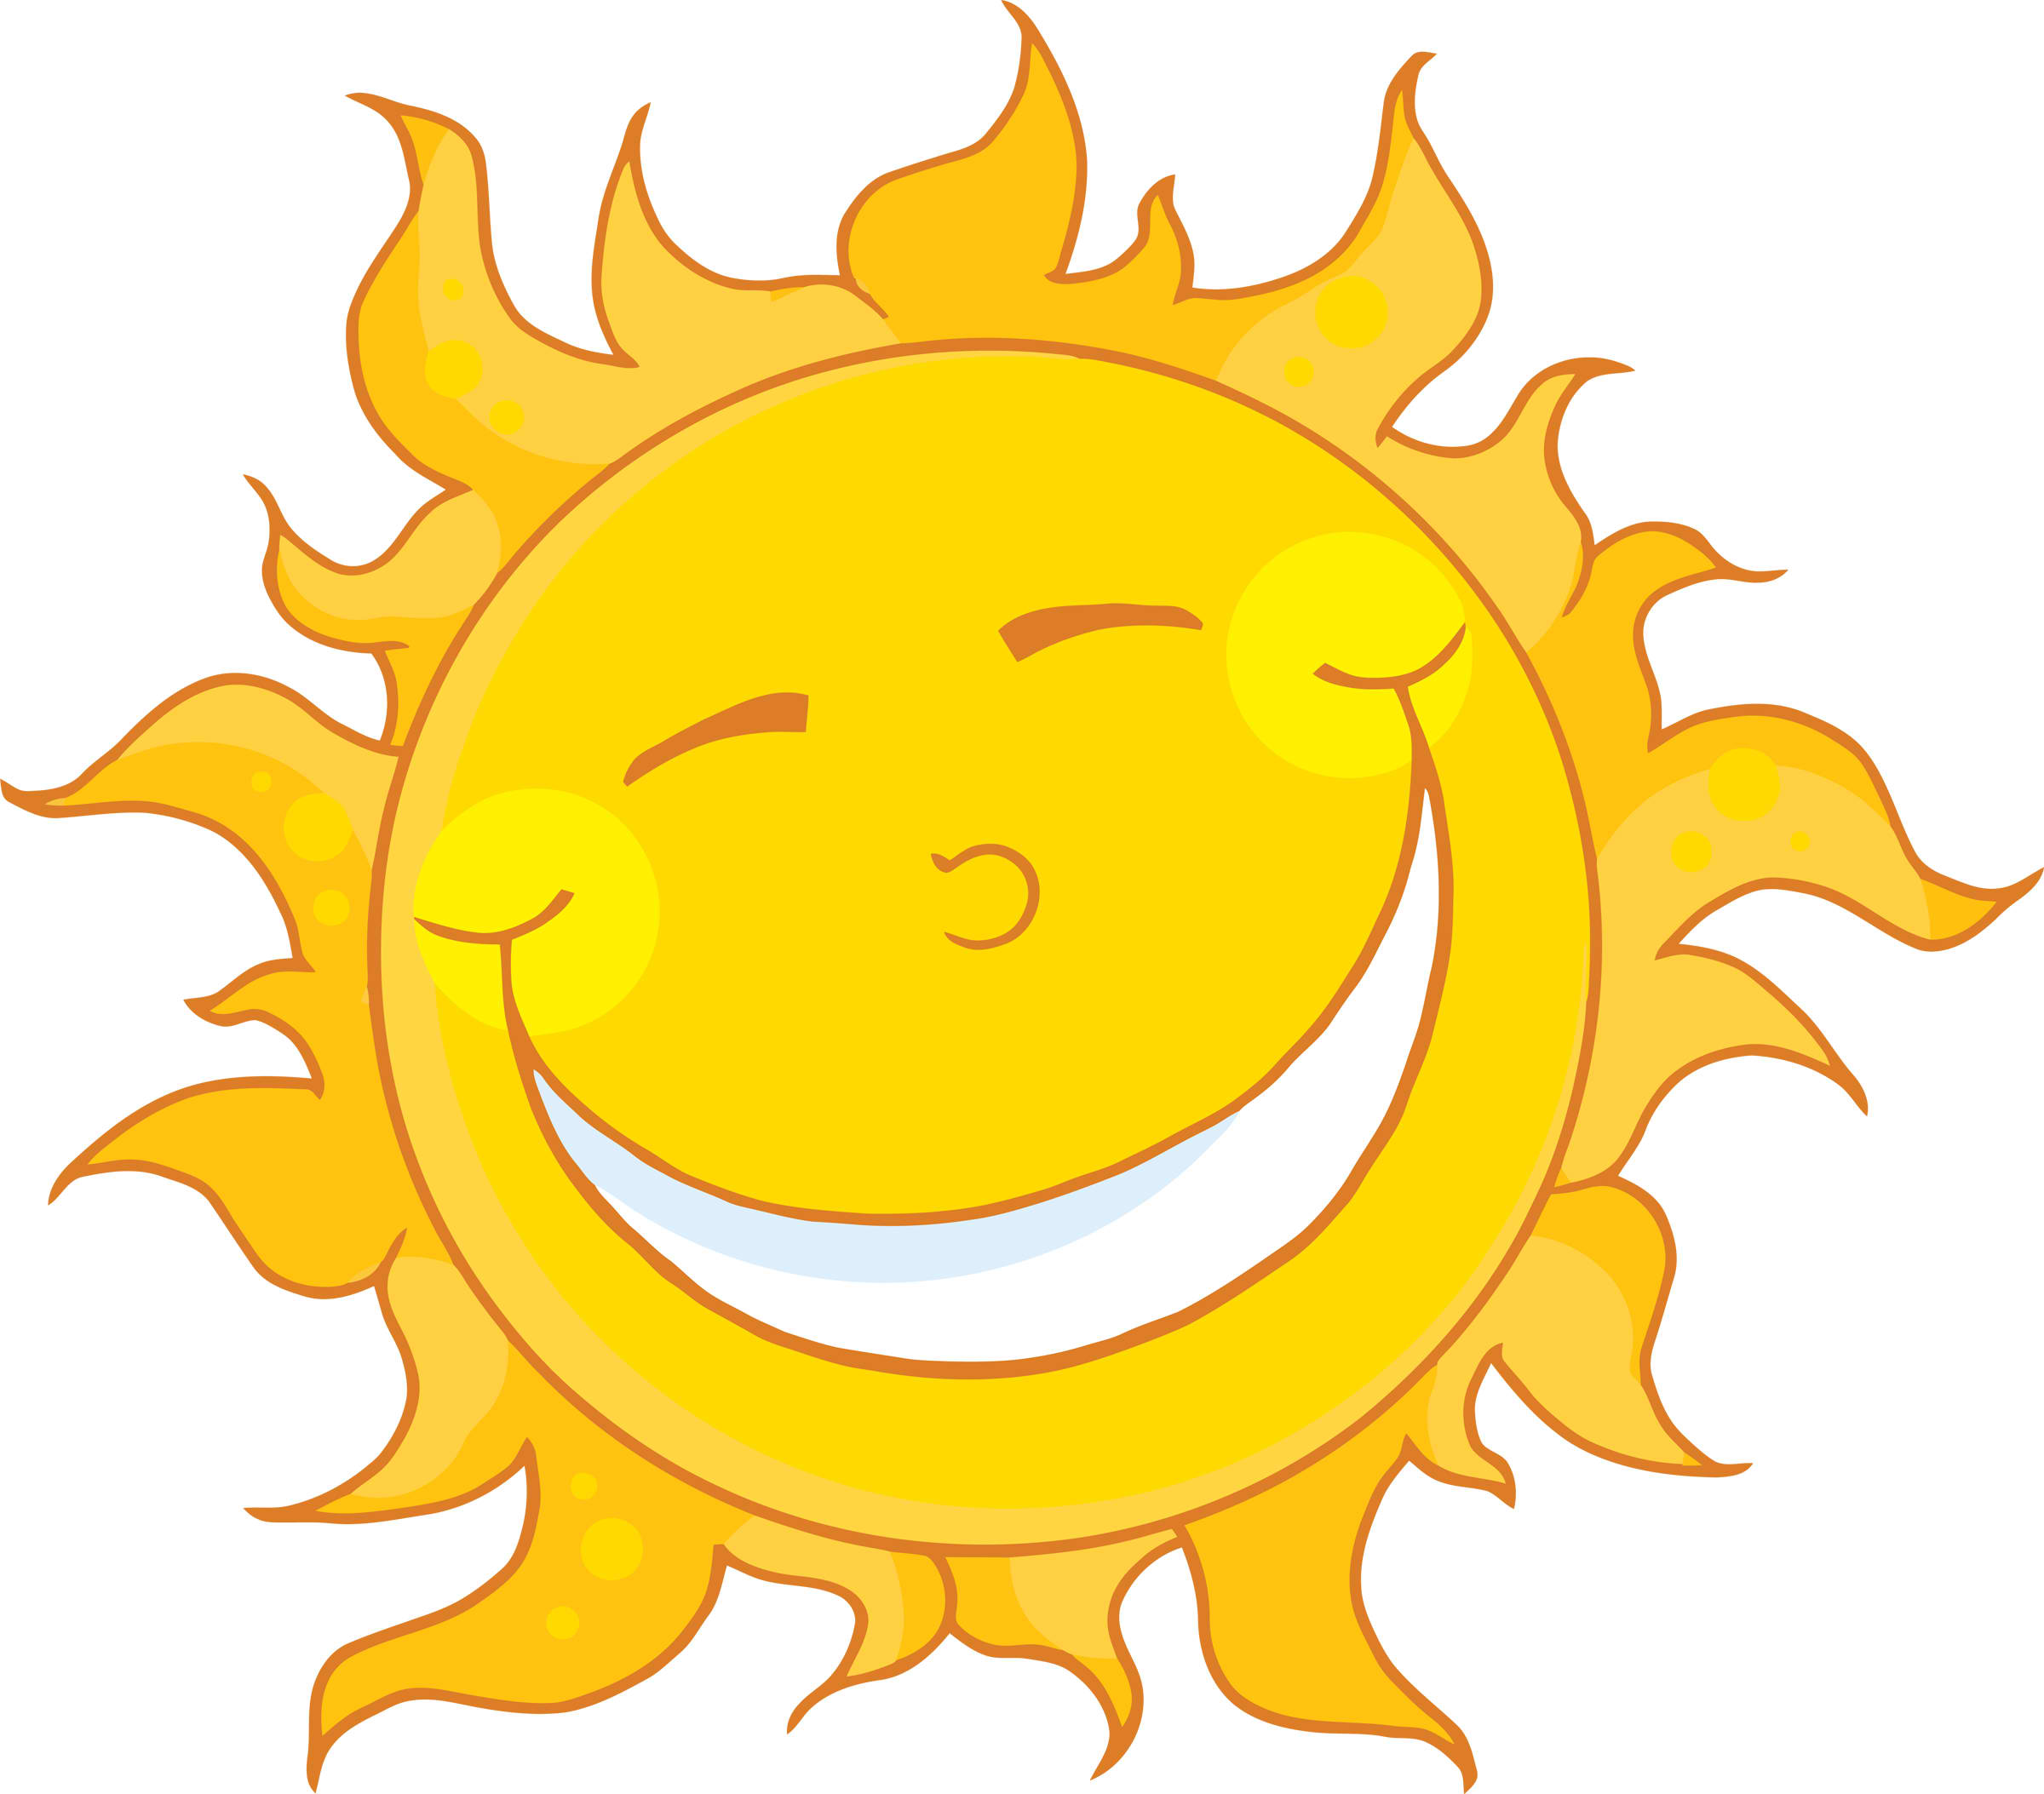 Free Pictures Of A Cartoon Sun Download Free Pictures Of A Cartoon Sun